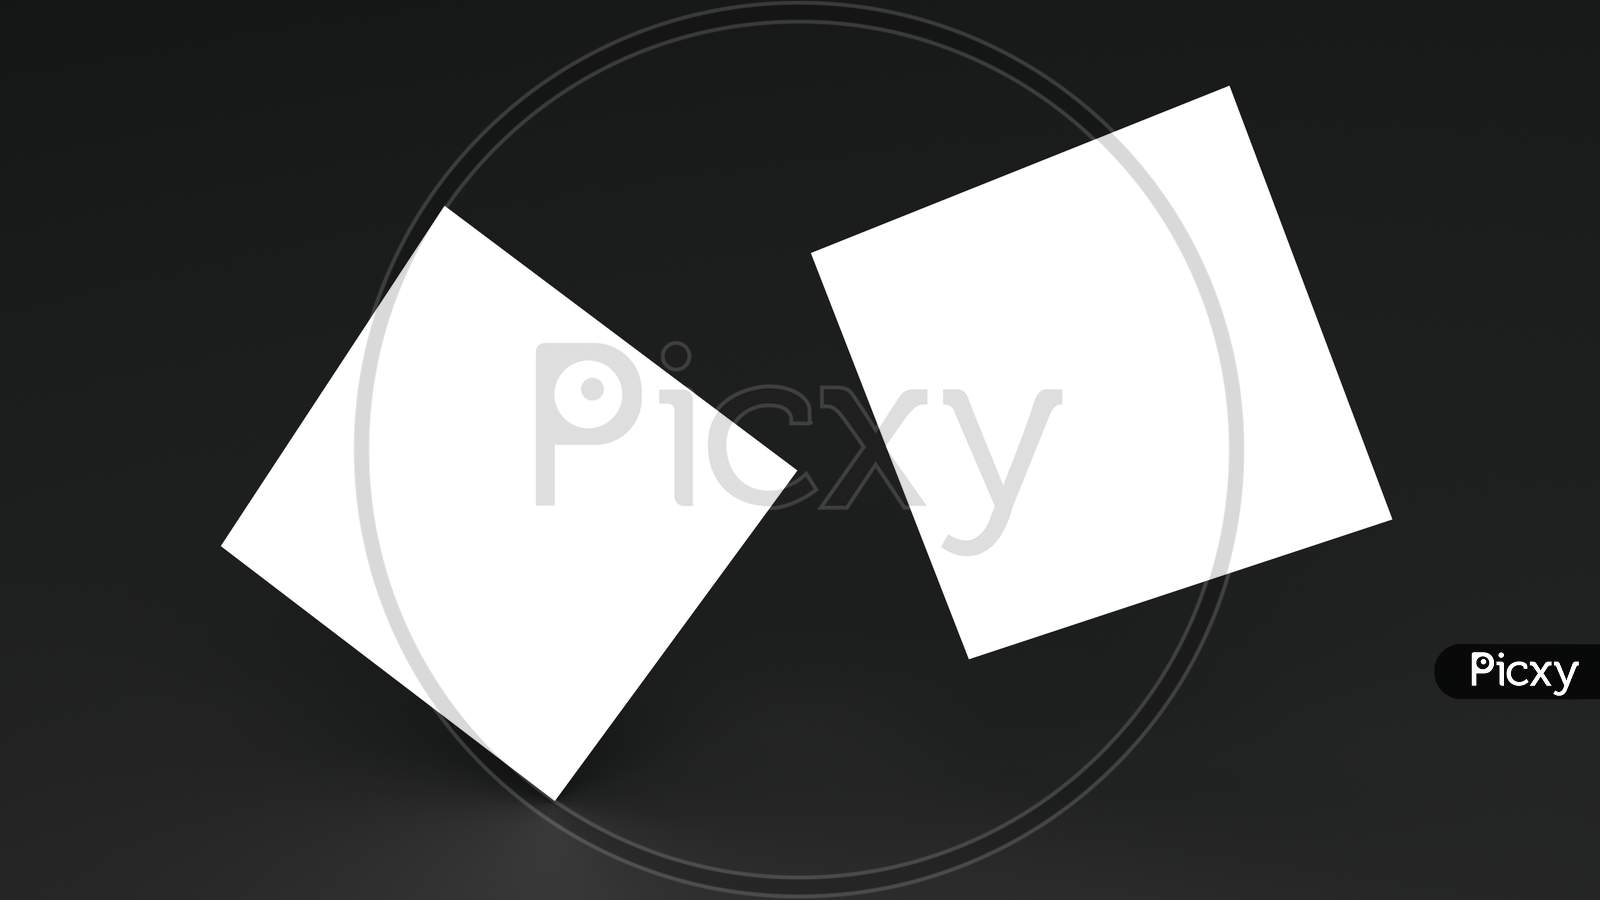 White Square Shape Business Card Mockup Stacking On Black Color Table Background. Branding Presentation Template Print. 2.5 X 2.5 Inch Paper Size Cover. Empty Blank Space. 3D Illustration Rendering